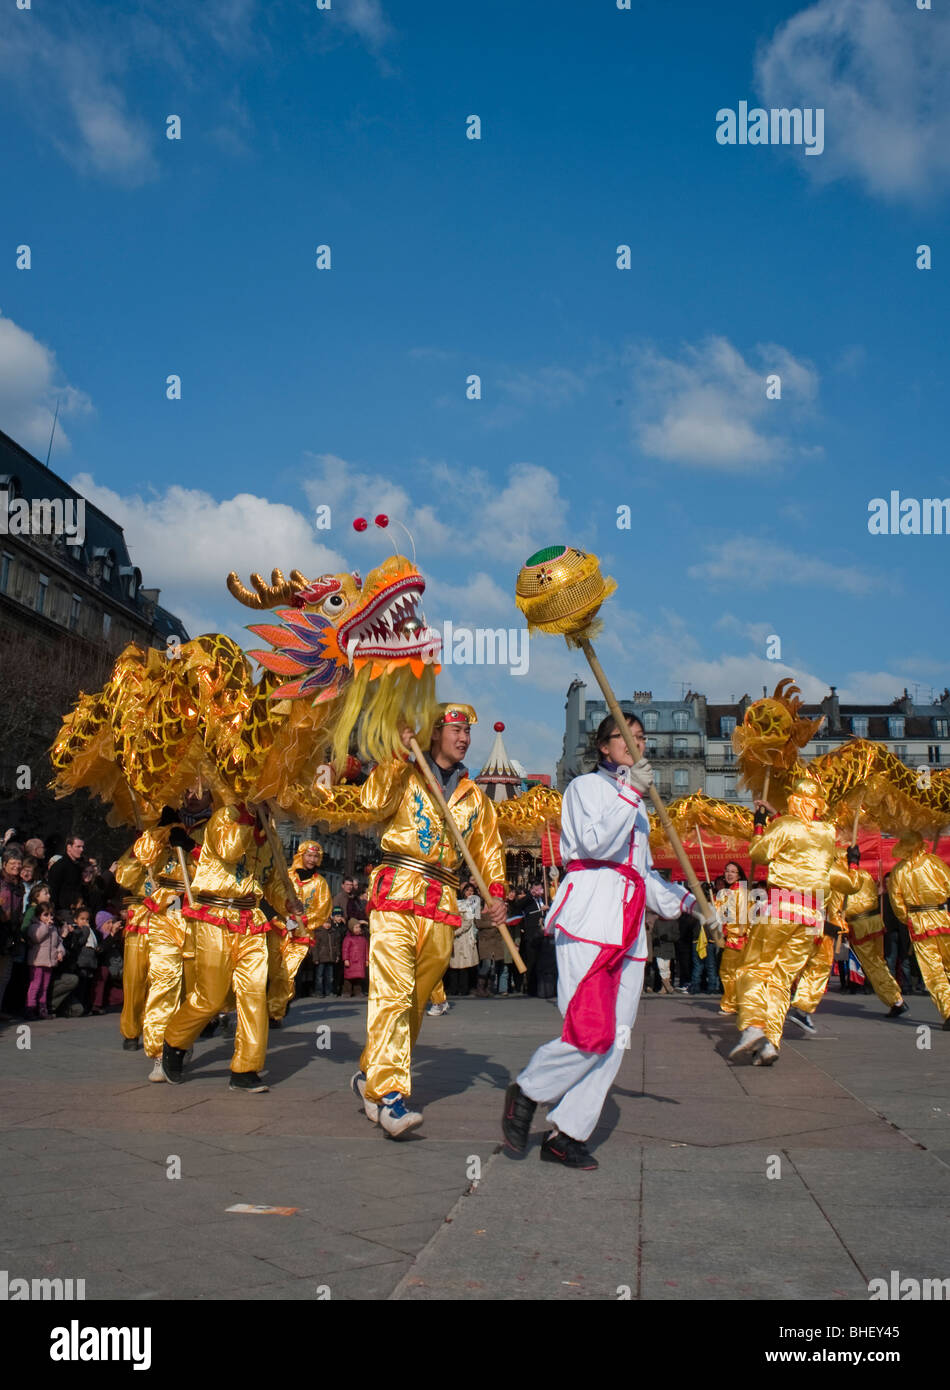 Paris, France, Large Group People in Colorful Costumes, Asians Celebrating "Chinese New year" Annual Street Carnival Parade, Chinese Dragon Dance Stock Photo